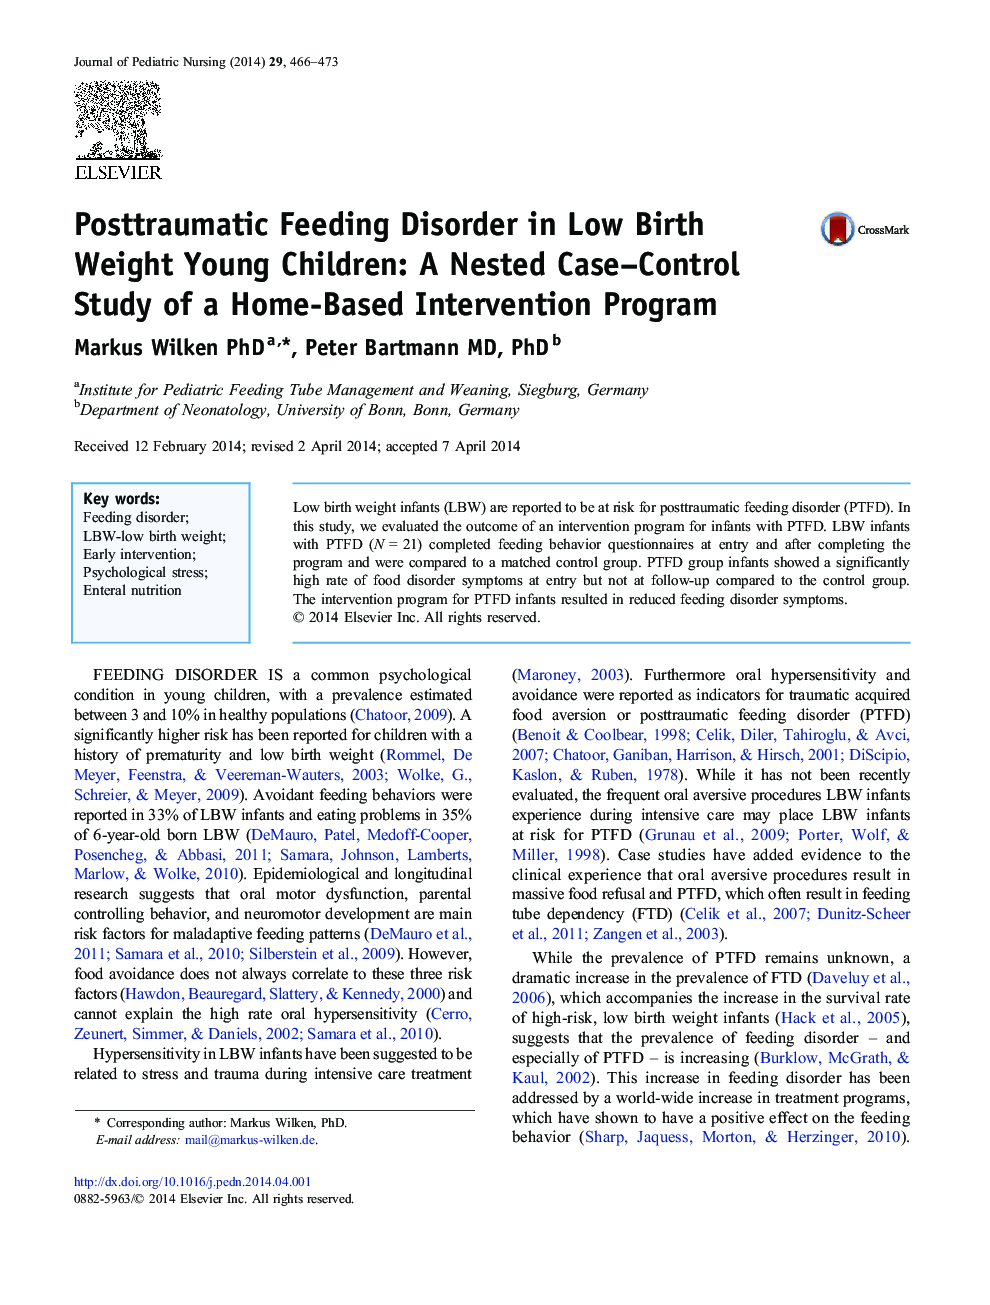 Posttraumatic Feeding Disorder in Low Birth Weight Young Children: A Nested Case–Control Study of a Home-Based Intervention Program